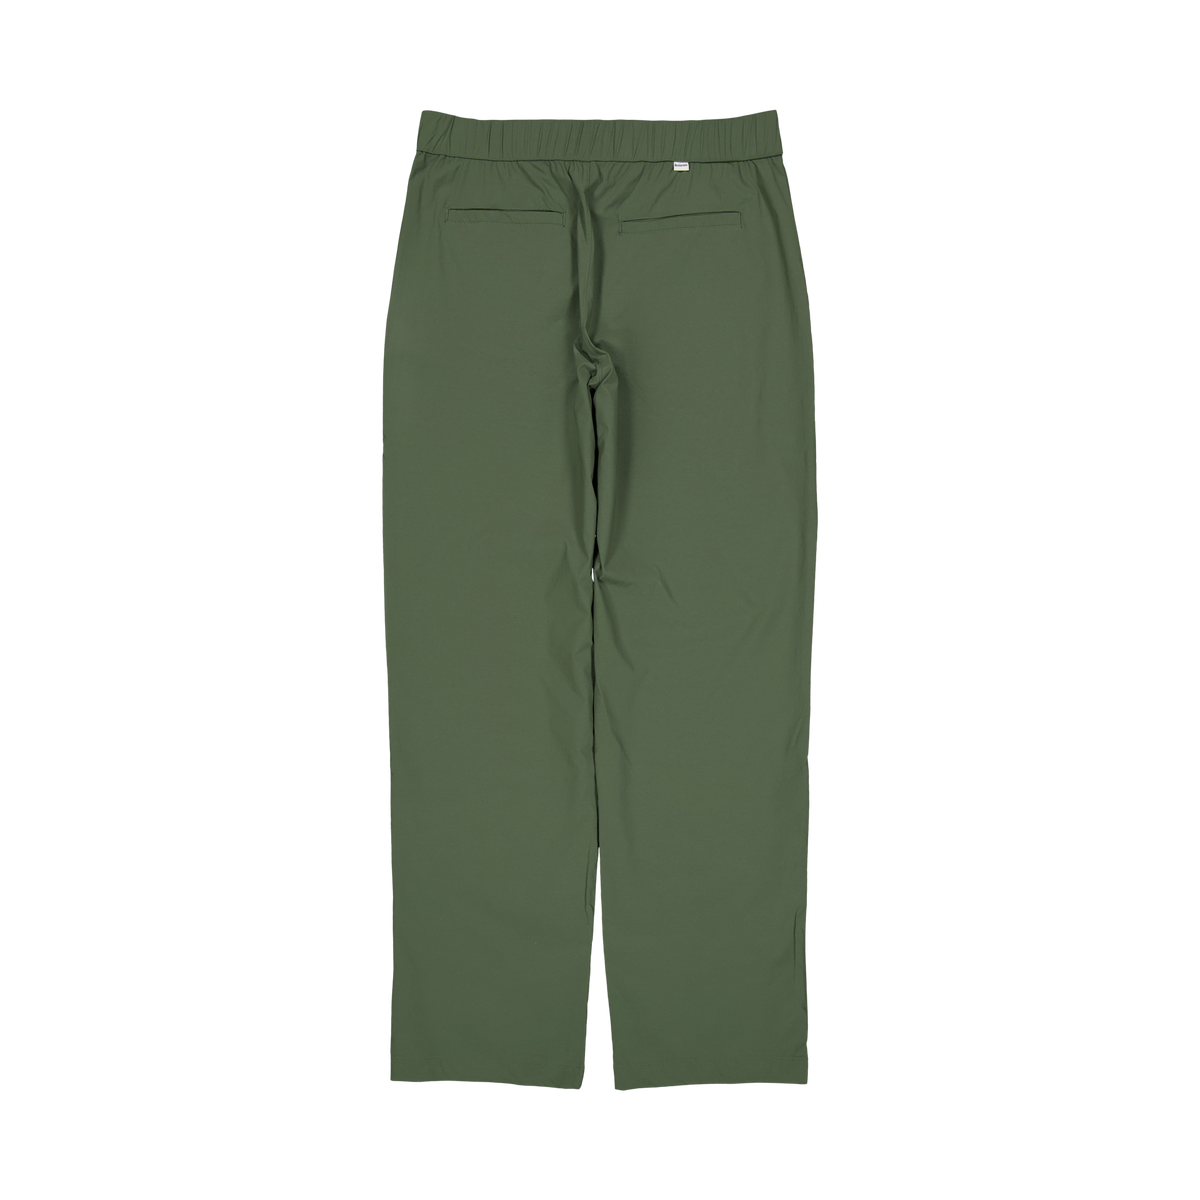 Loose Pant Lightweight 90 Army